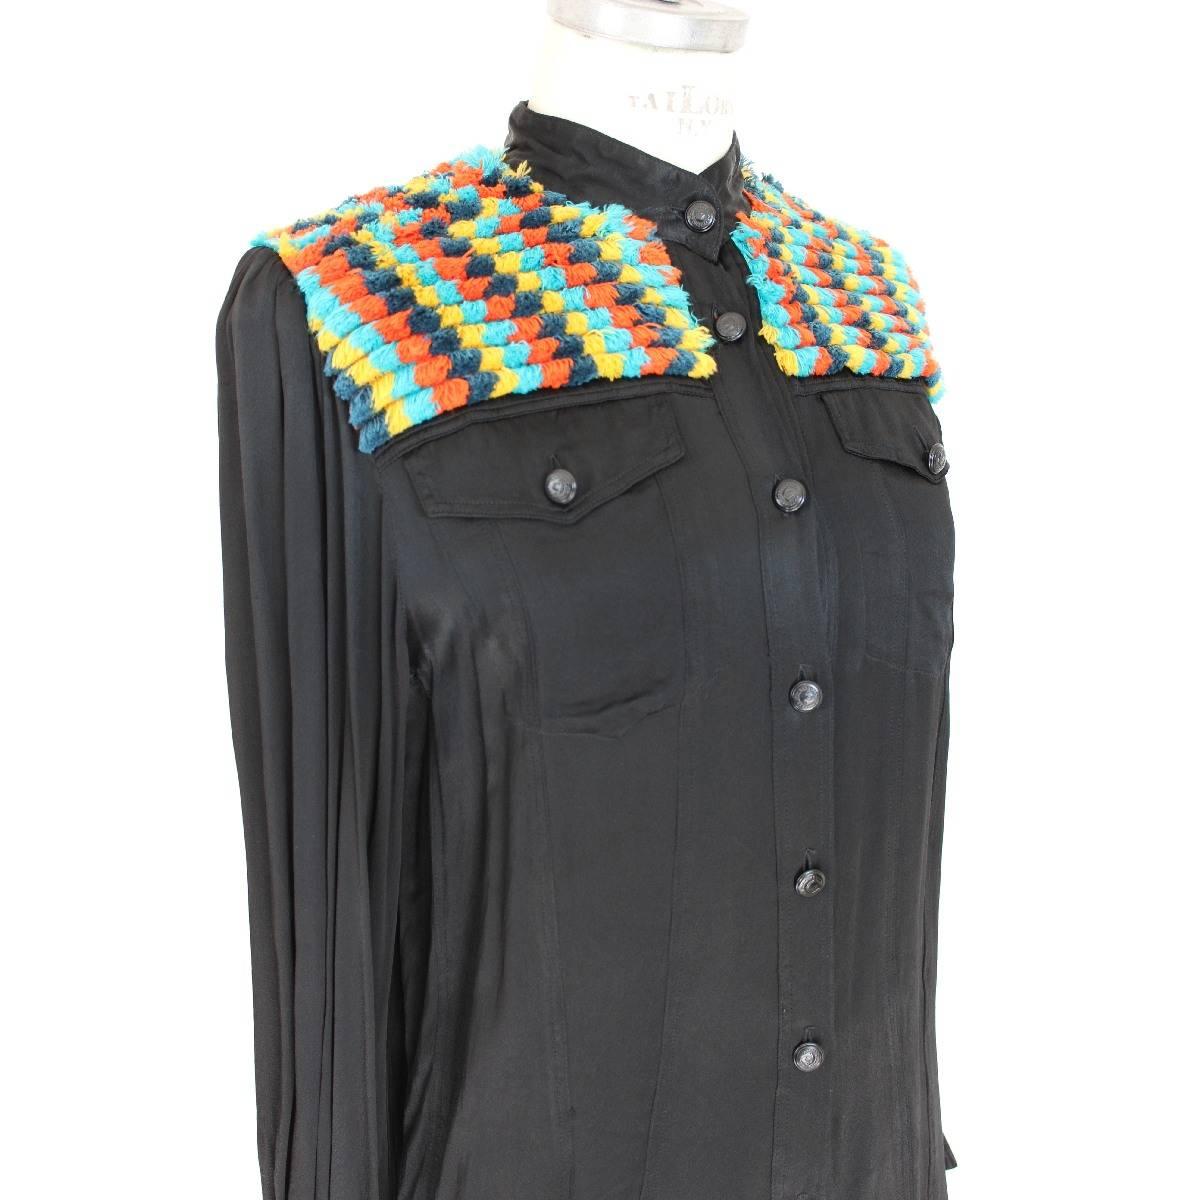 Moschino shirt black vintage multicolored wool shoulder slim fit 1980s polo neck In Excellent Condition For Sale In Brindisi, IT